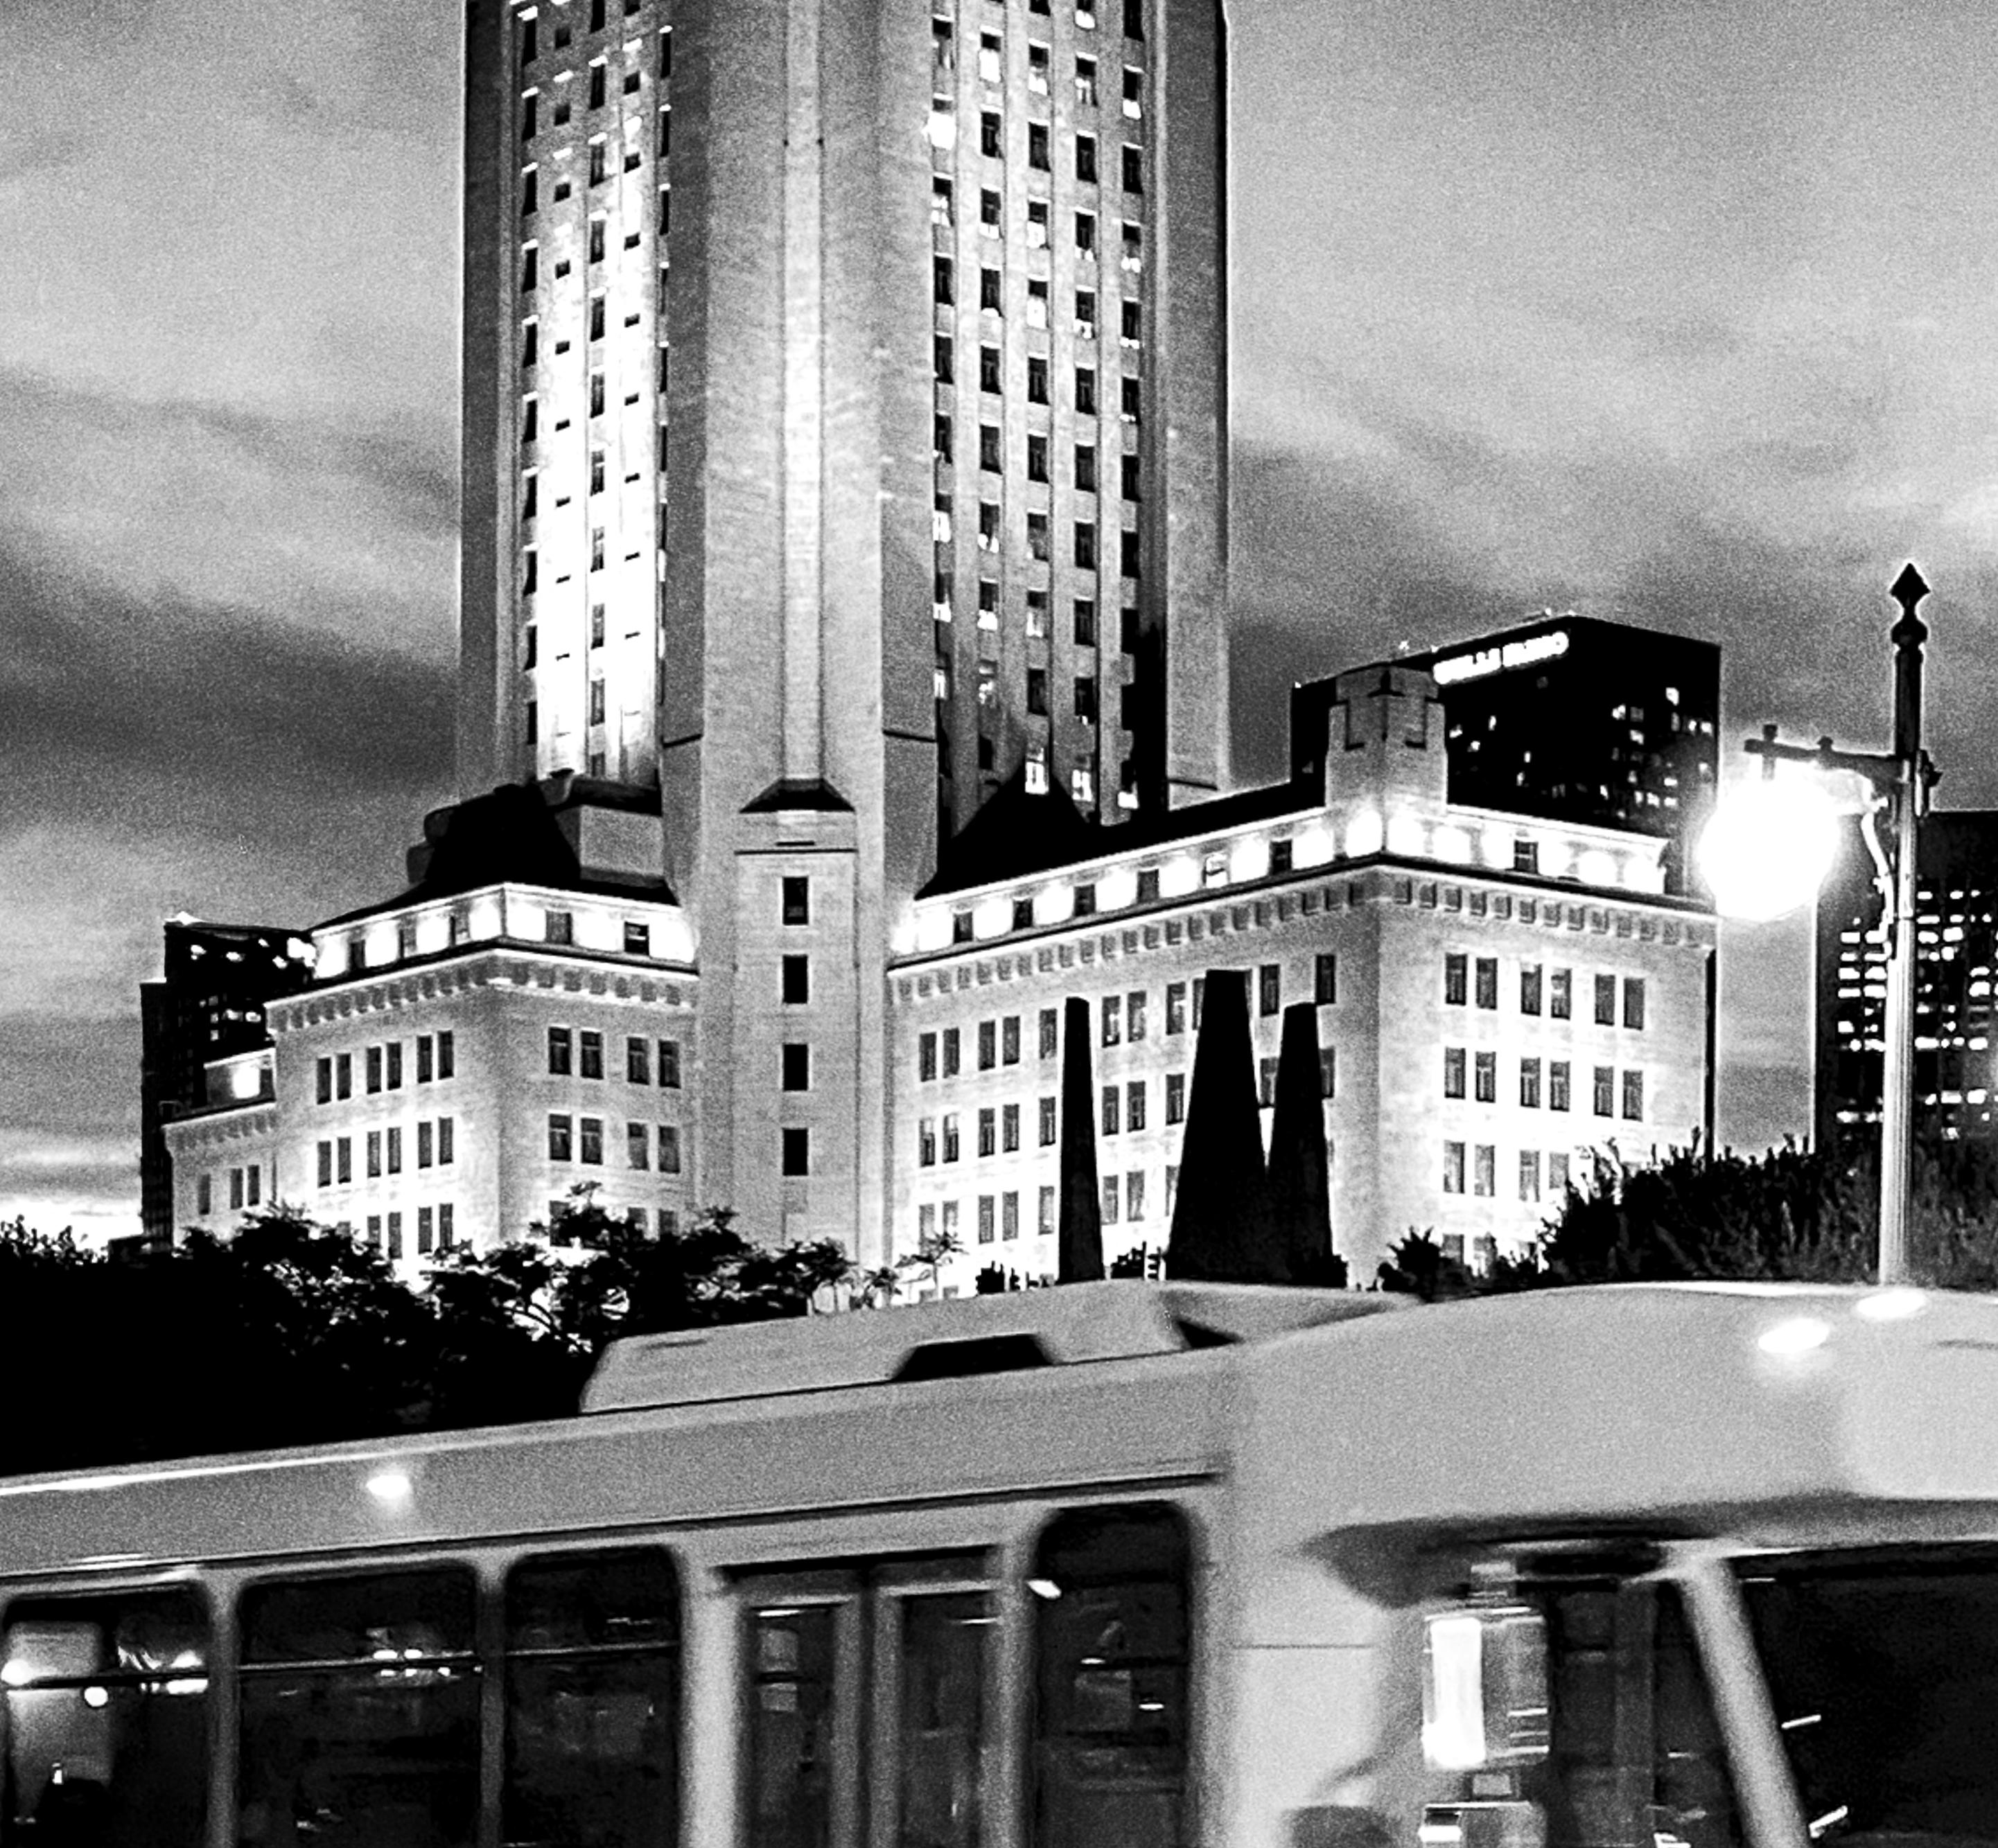 Black and white urban landscape. The photograph is taken in Downtown, Los Angeles.

Original gallery quality archival pigment print on archival paper signed by the artist.
Limited edition of 6
Paper size: 24